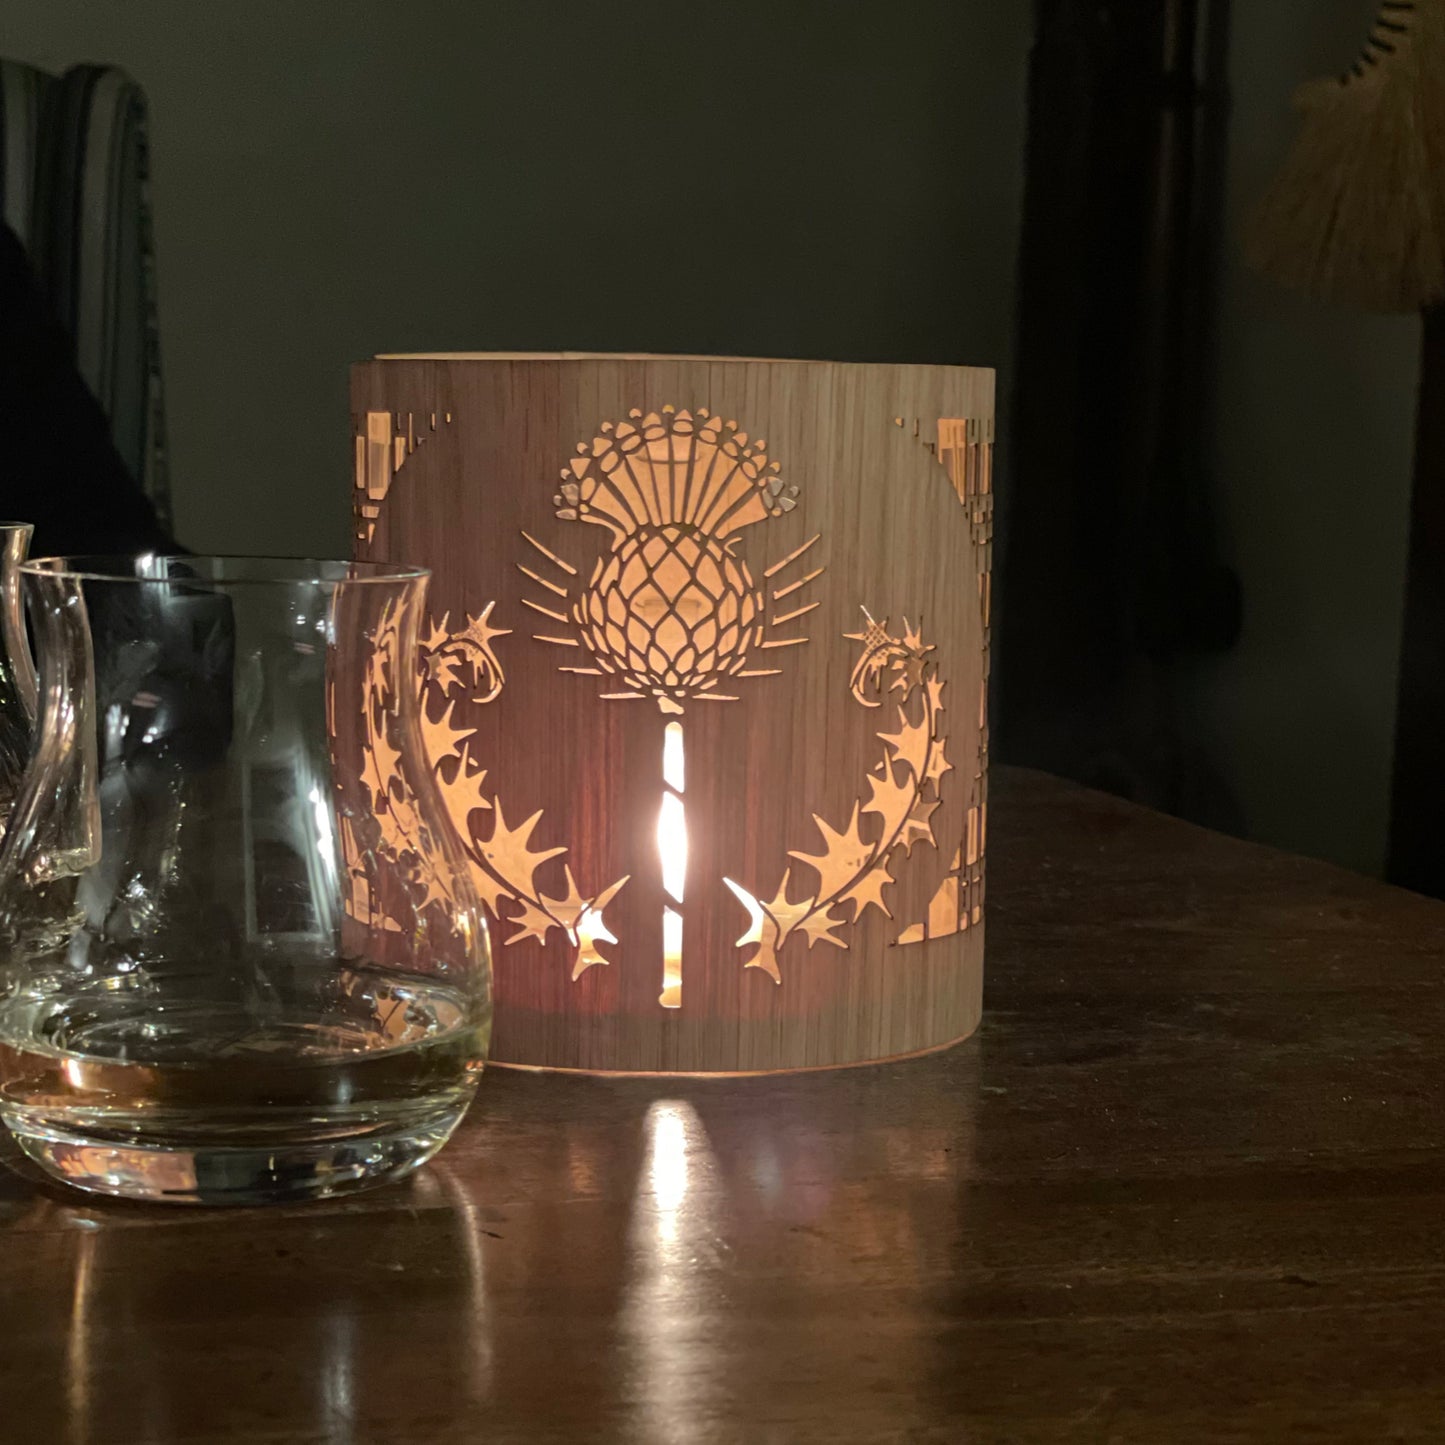 close up of a thistle lantern beside a glass of scotch for Robbie Burns night